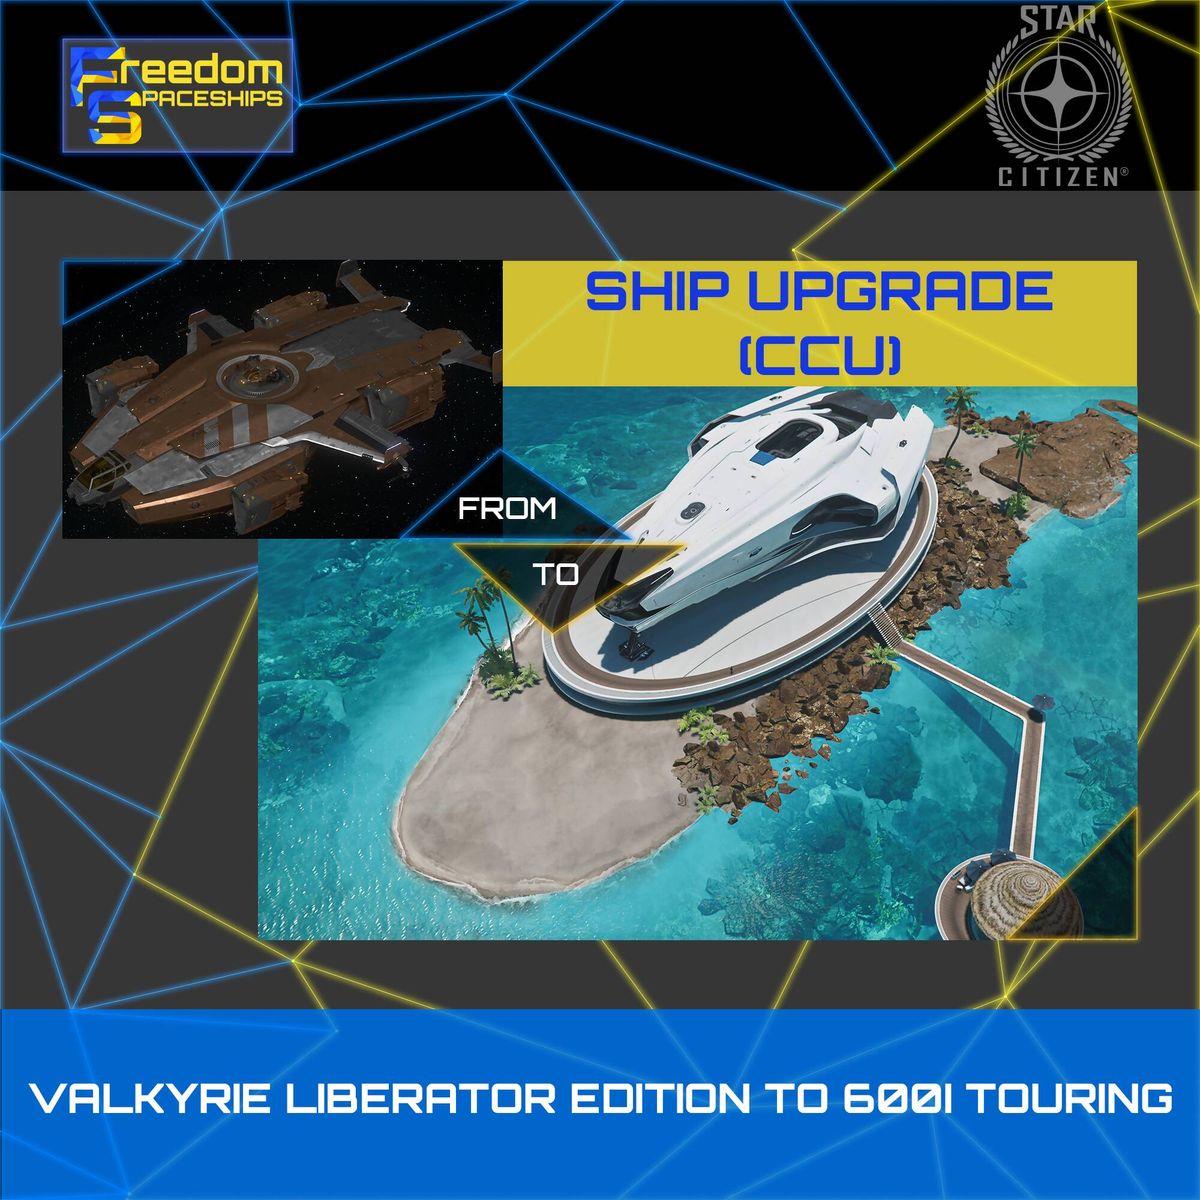 Upgrade - Valkyrie Liberator Edition to 600i Touring